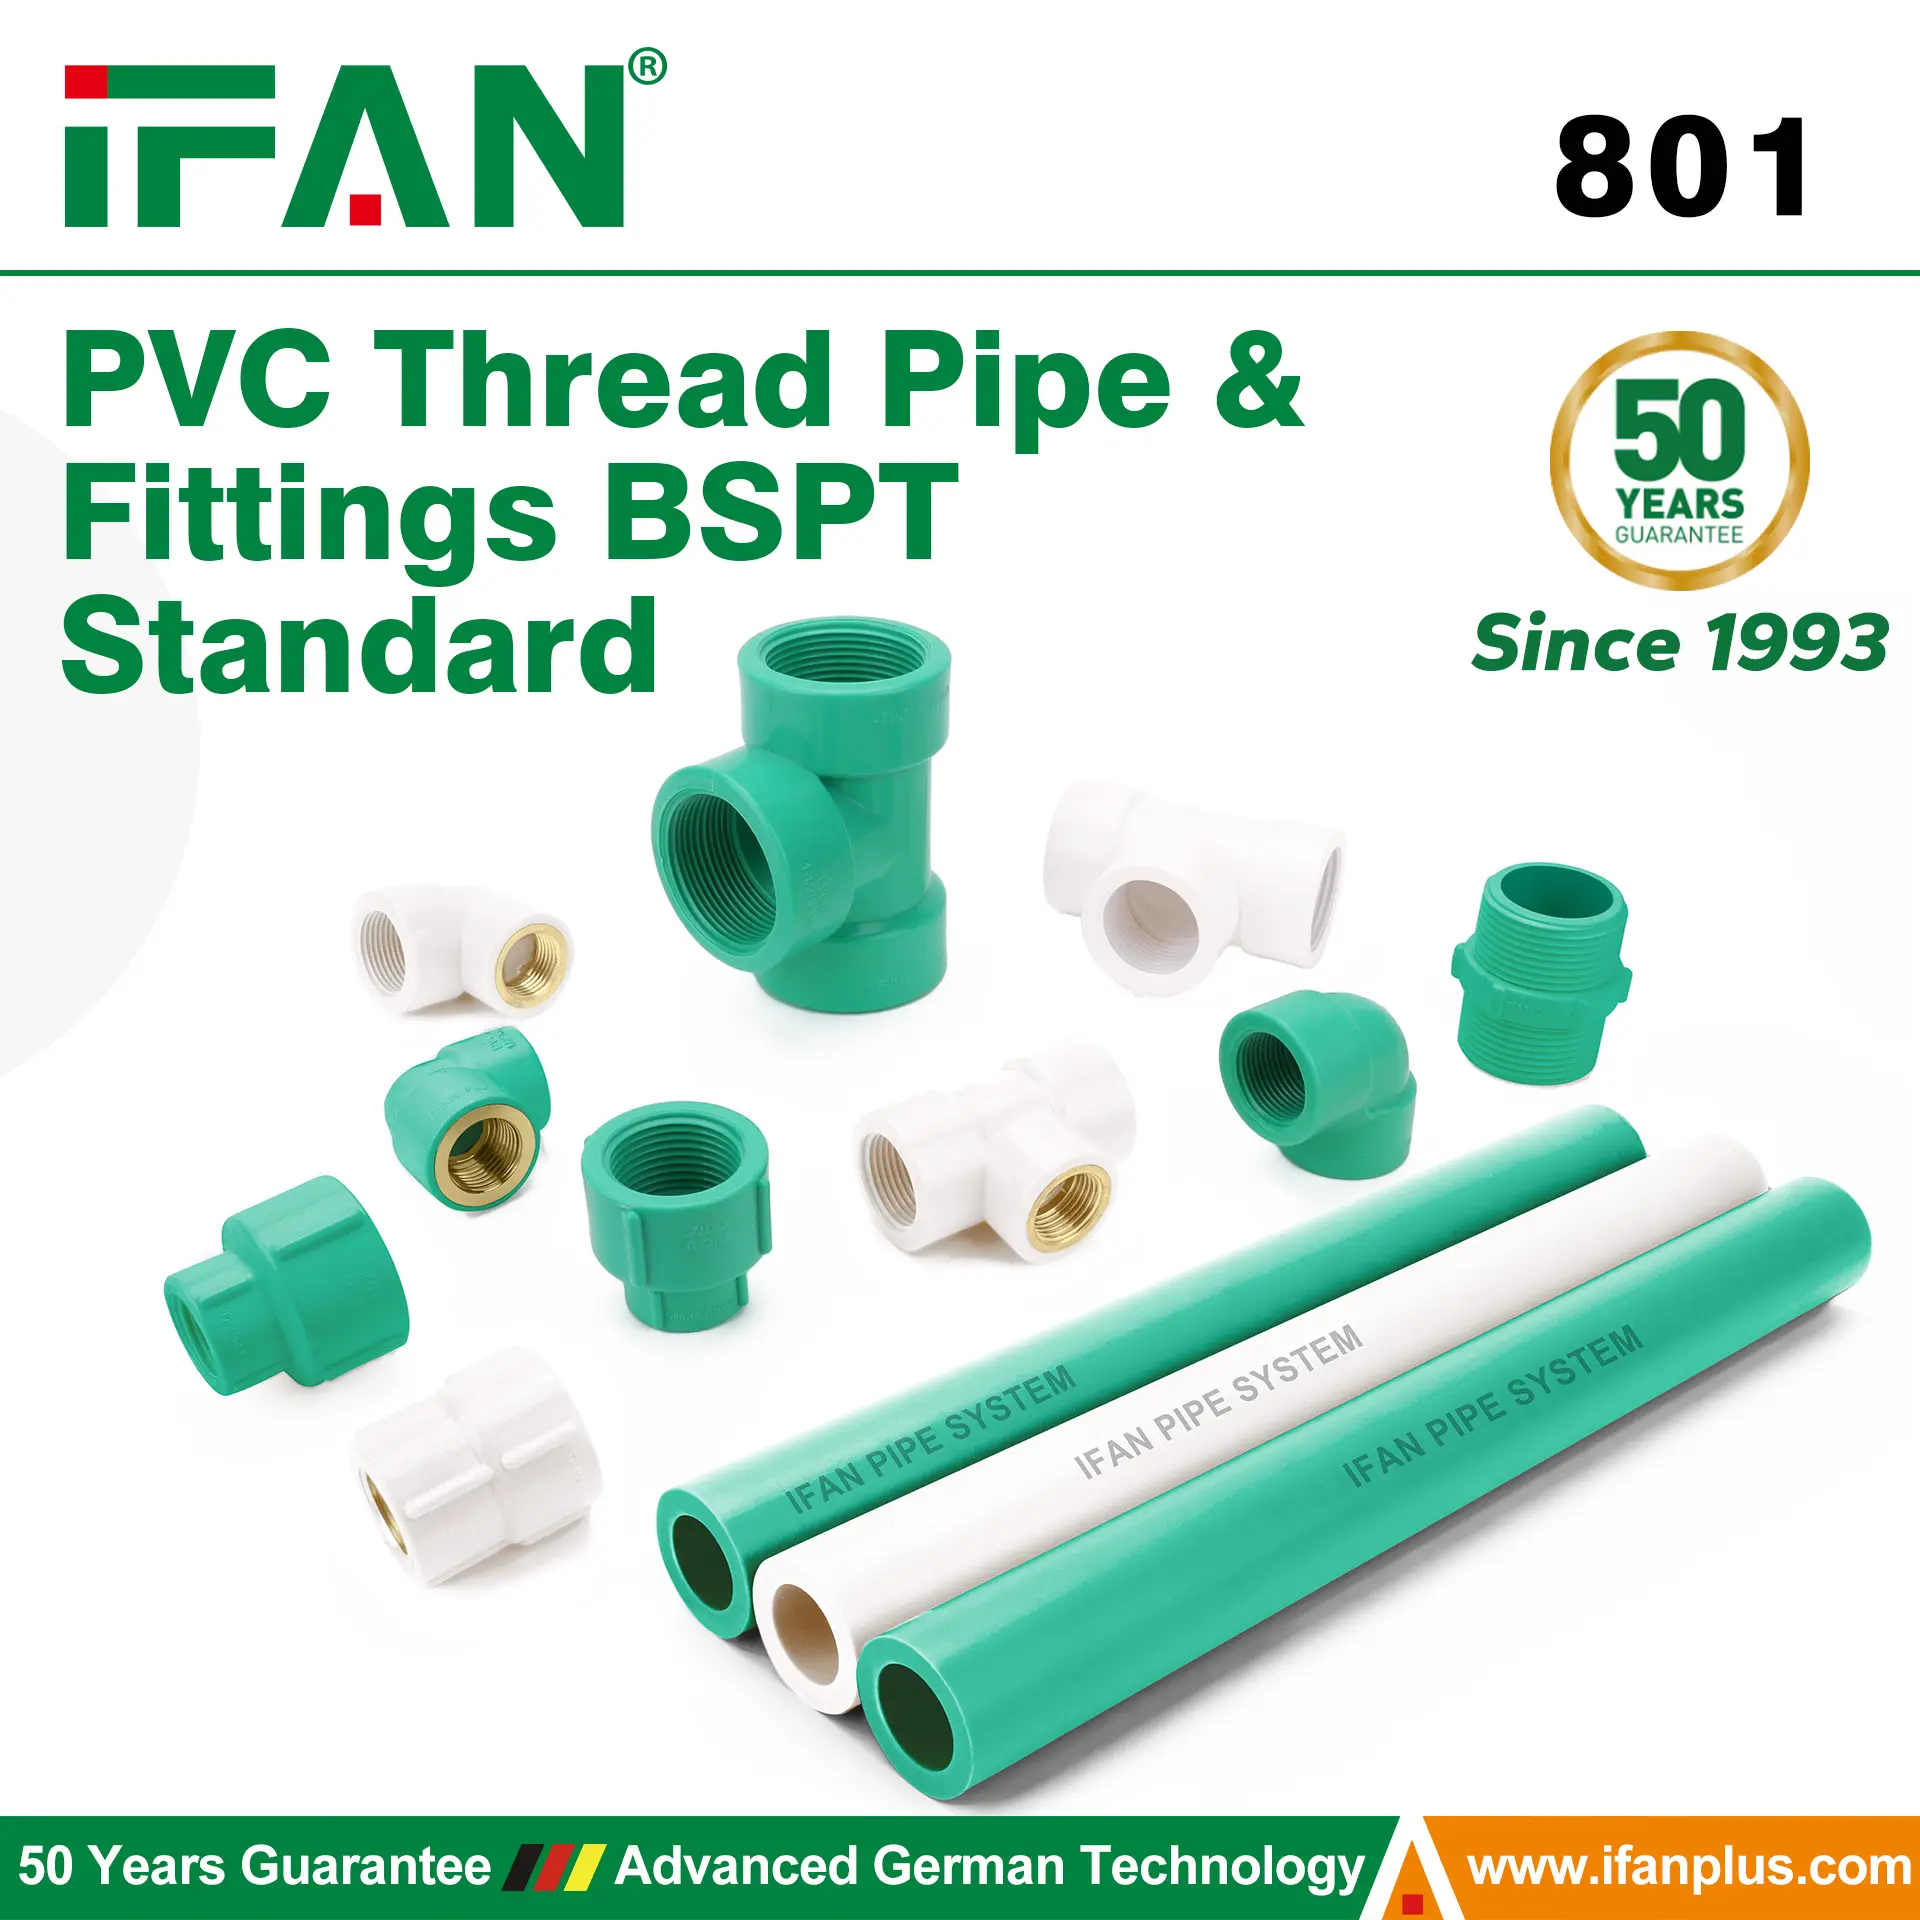 PVC Thread Pipe and Fittings BSPT